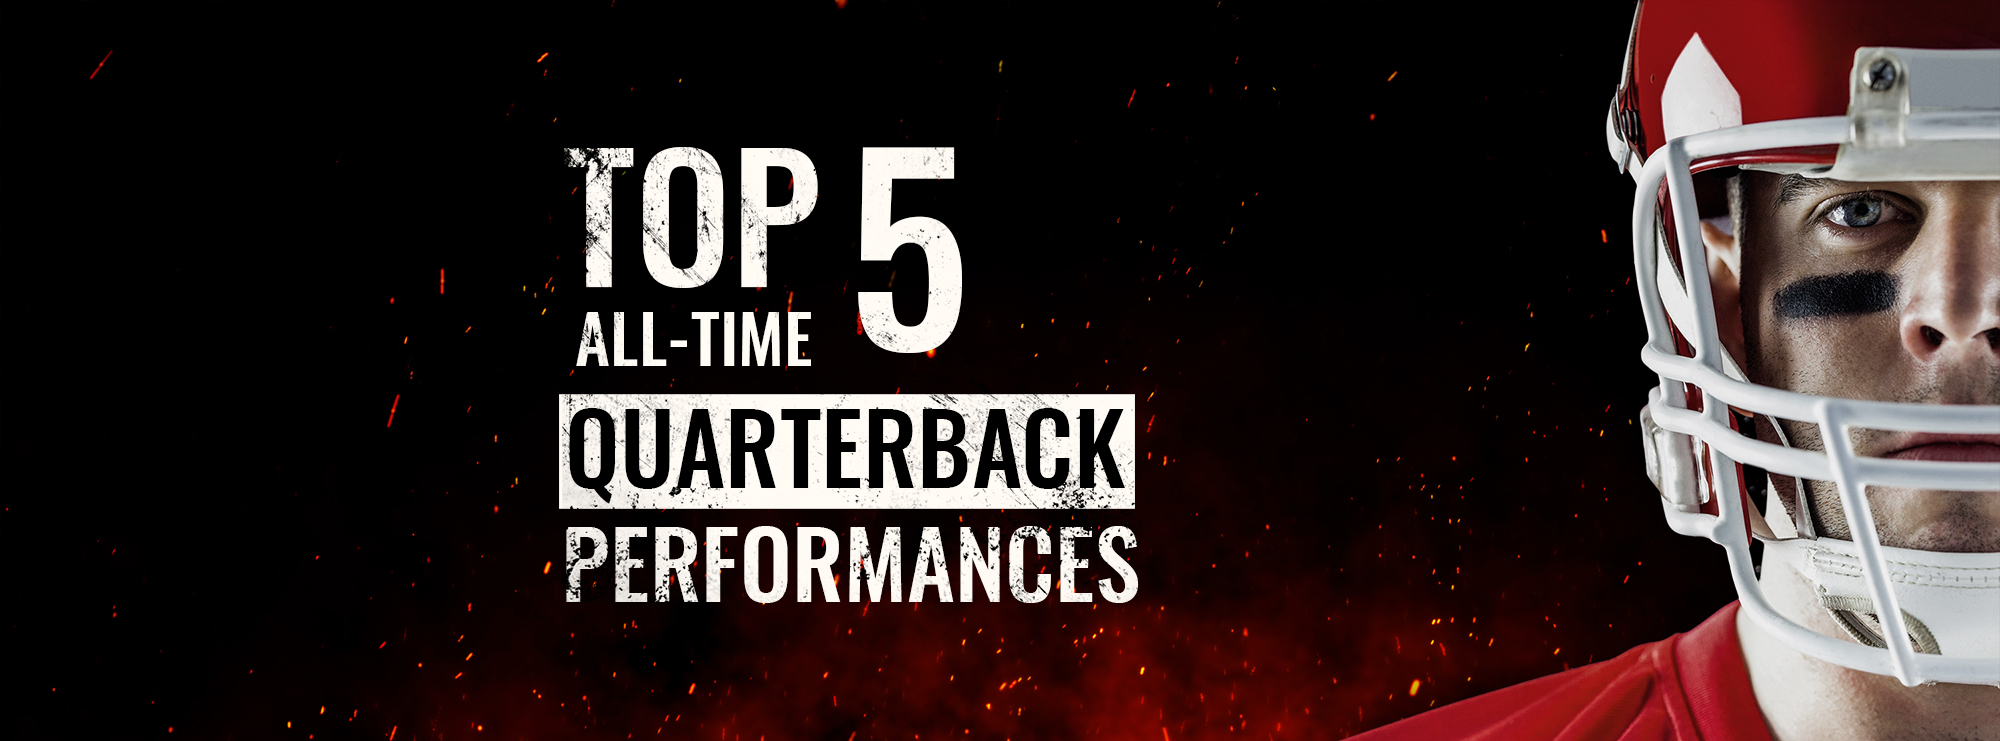 While you make your last-minute checks before betting on the Super Bowl at Bodog, dive into these top 5 all-time quarterback performances.